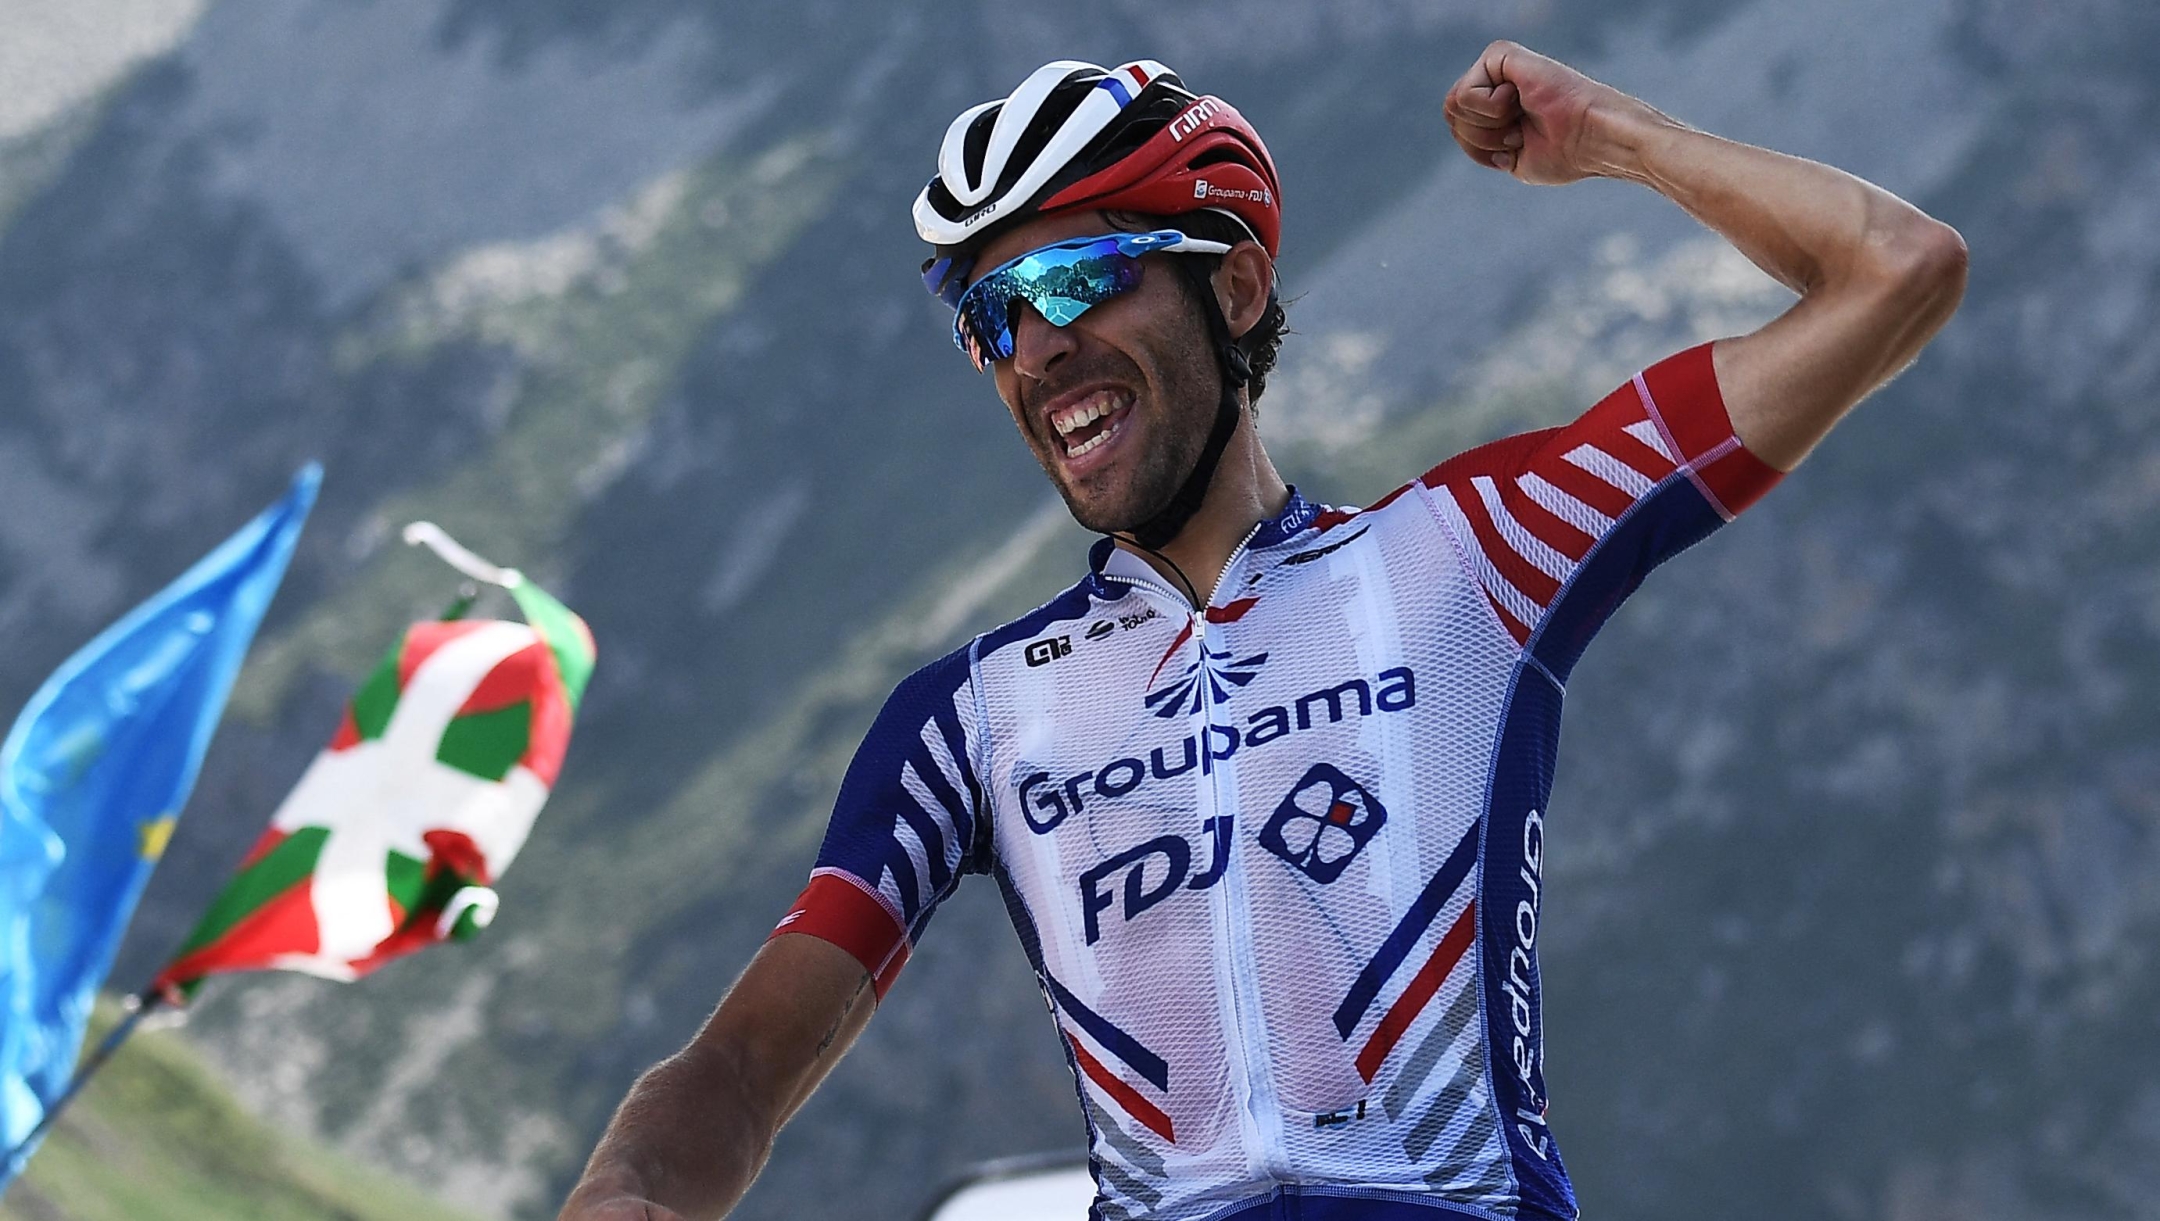 (FILES) France's Thibaut Pinot celebrates as he wins on the finish line of the fourteenth stage of the 106th edition of the Tour de France cycling race between Tarbes and Tourmalet Bareges, in Tourmalet Bareges on July 20, 2019. Thibaut Pinot, the idol of French cycling, is putting in his final pedal strokes this week in Italy before hanging up his bike for good and leaving behind the legacy of a rider like no other. (Photo by Anne-Christine POUJOULAT / AFP)